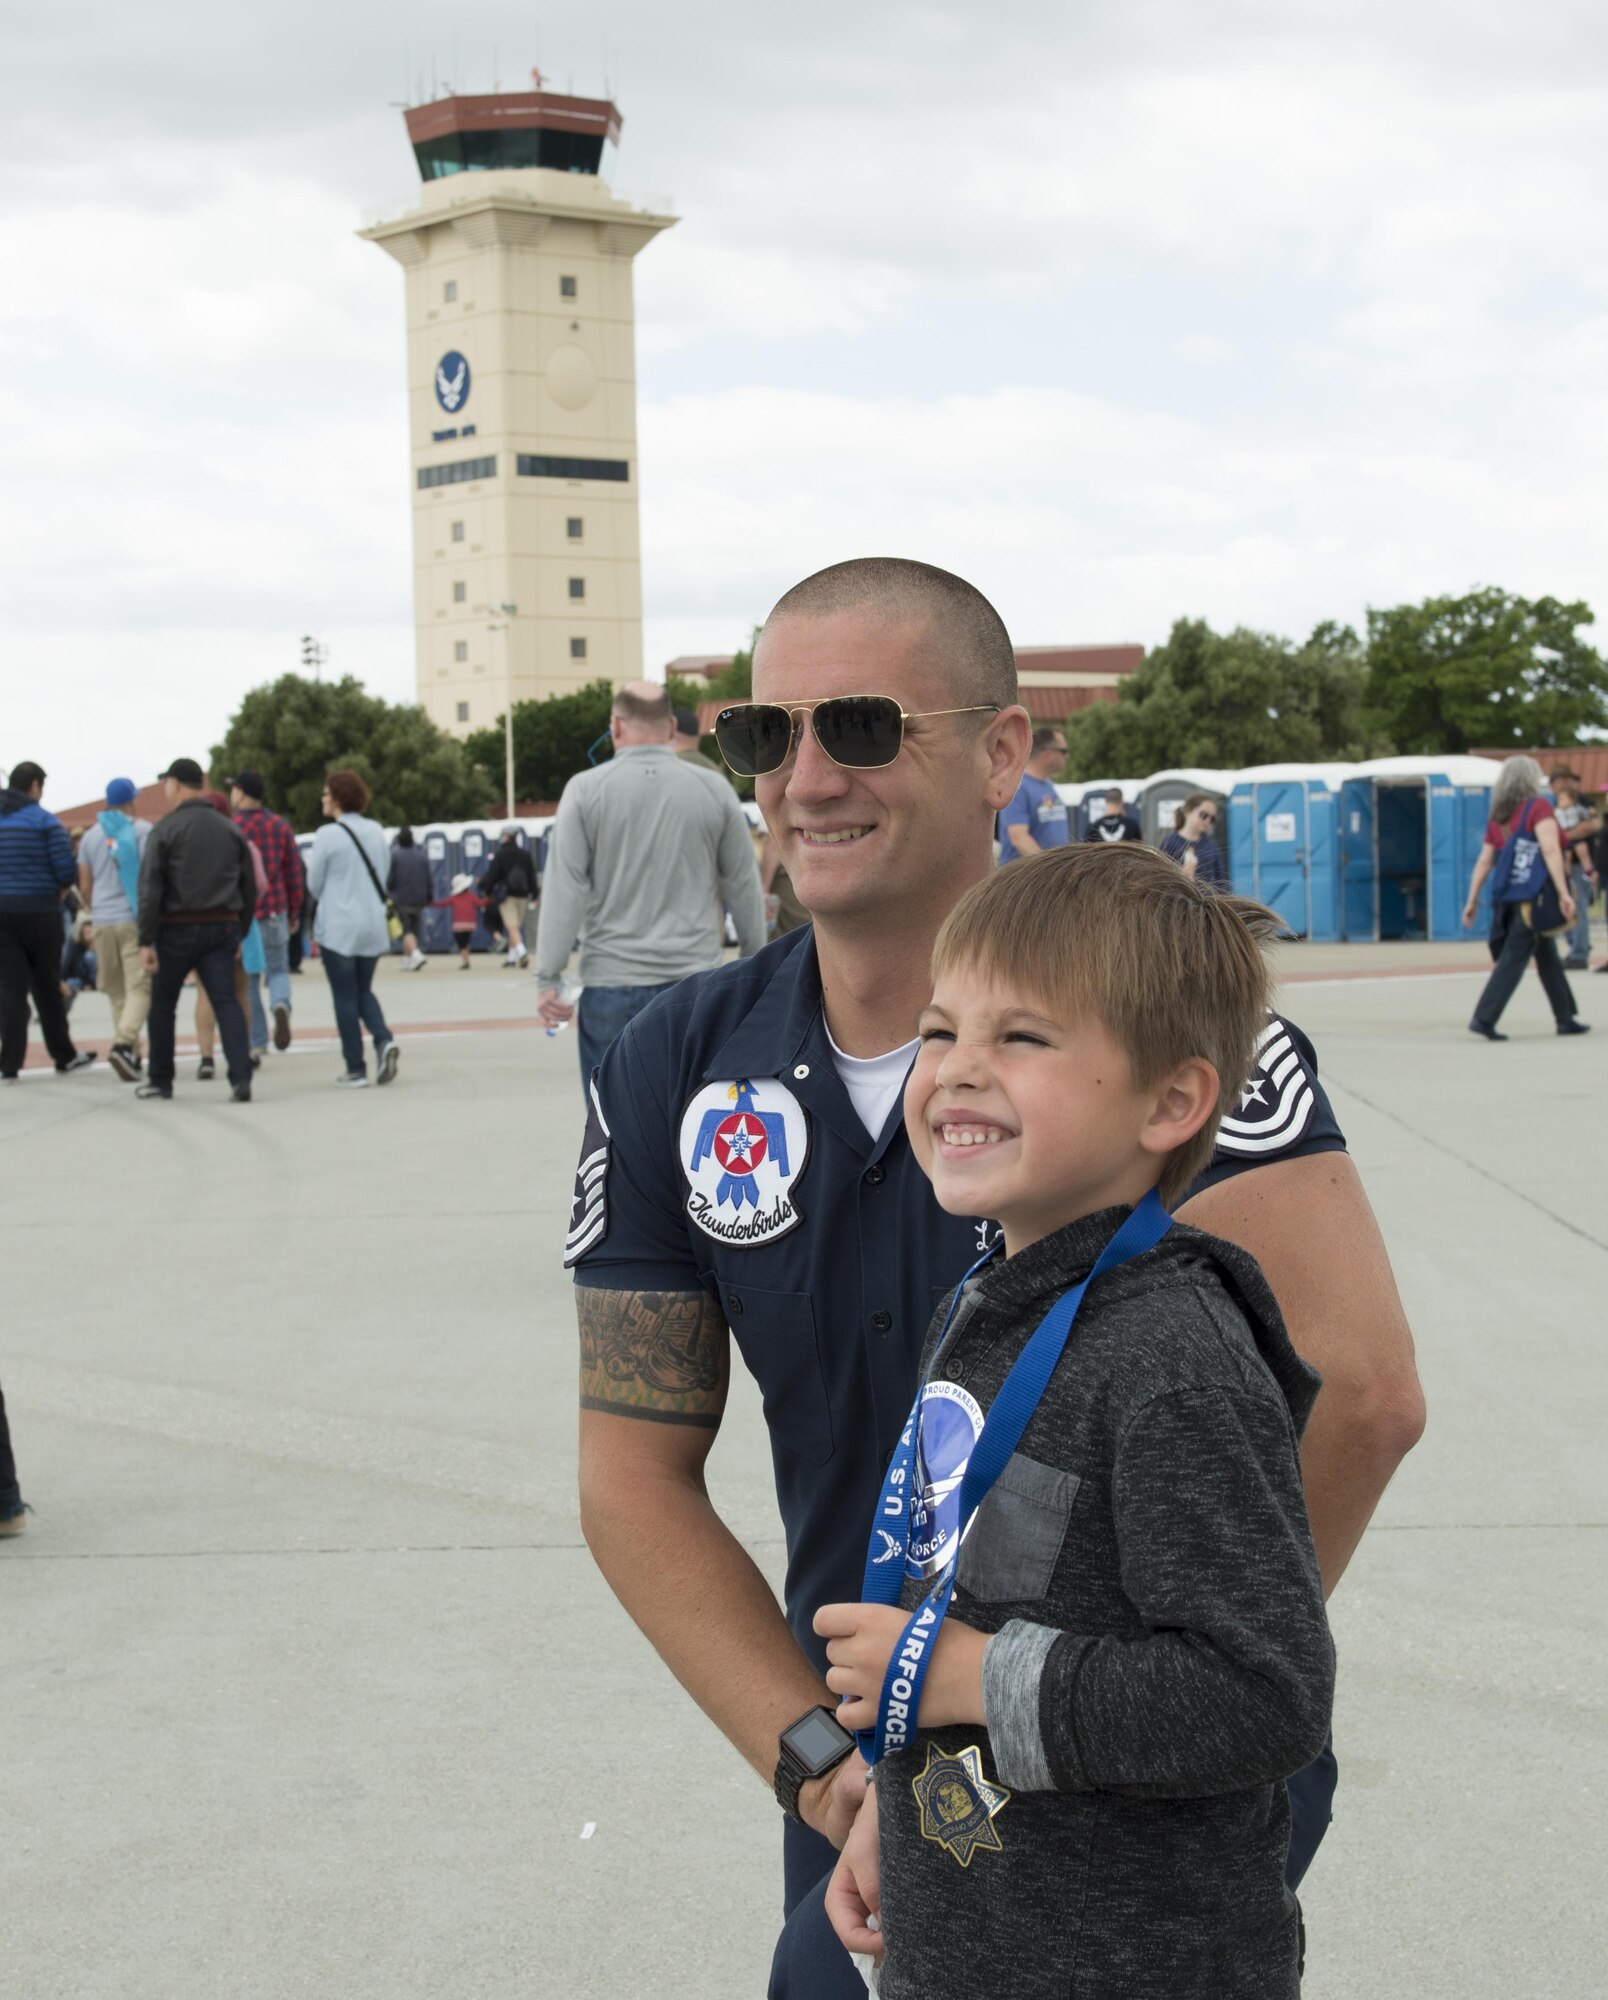 A member of the U.S. Air Force Thunderbirds poses for a photo with a child at the Wings Over Solano Air Show at Travis Air Force Base, Calif., May 6, 2017. The two-day event featured performances by the Thunderbirds, U.S. Army Golden Knights parachute team, flyovers and static displays. (U.S. Air Force photo by Heide Couch)